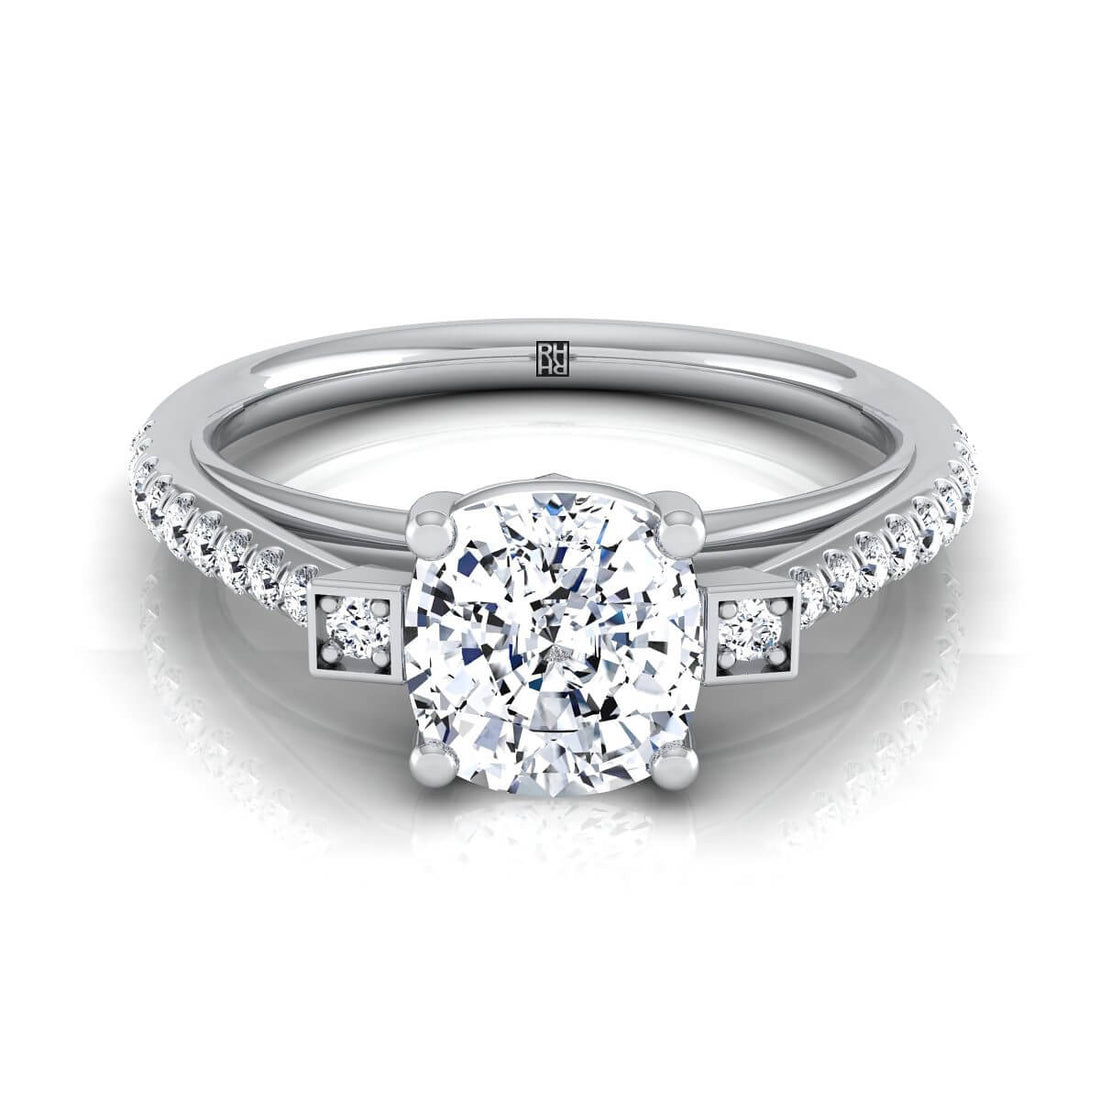 How Much Does a 2 Carat Diamond Ring Cost?